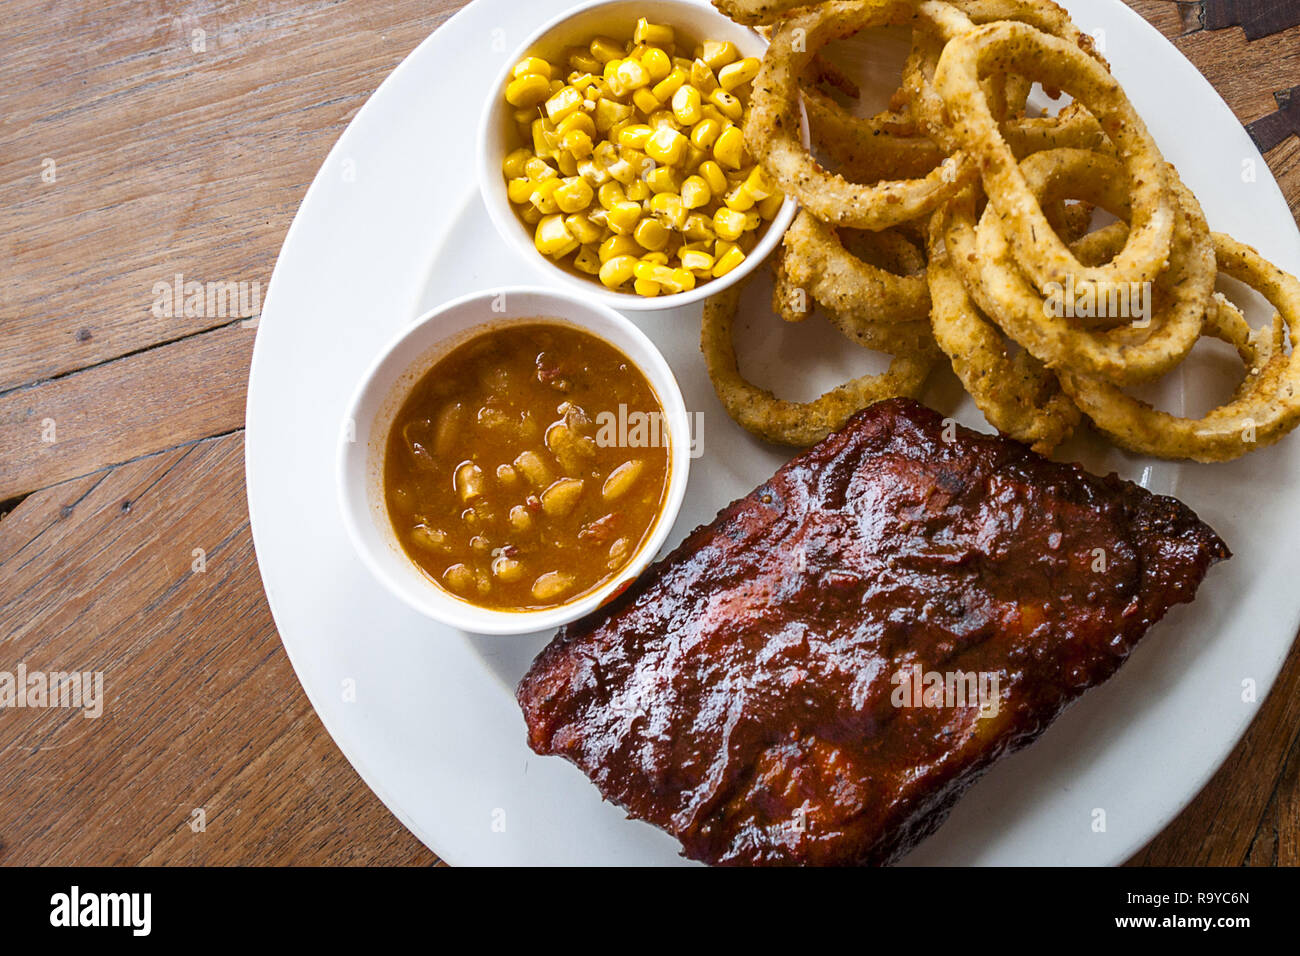 BBQ Ribs, baked beans, onion rings served on a white plate. Stock Photo